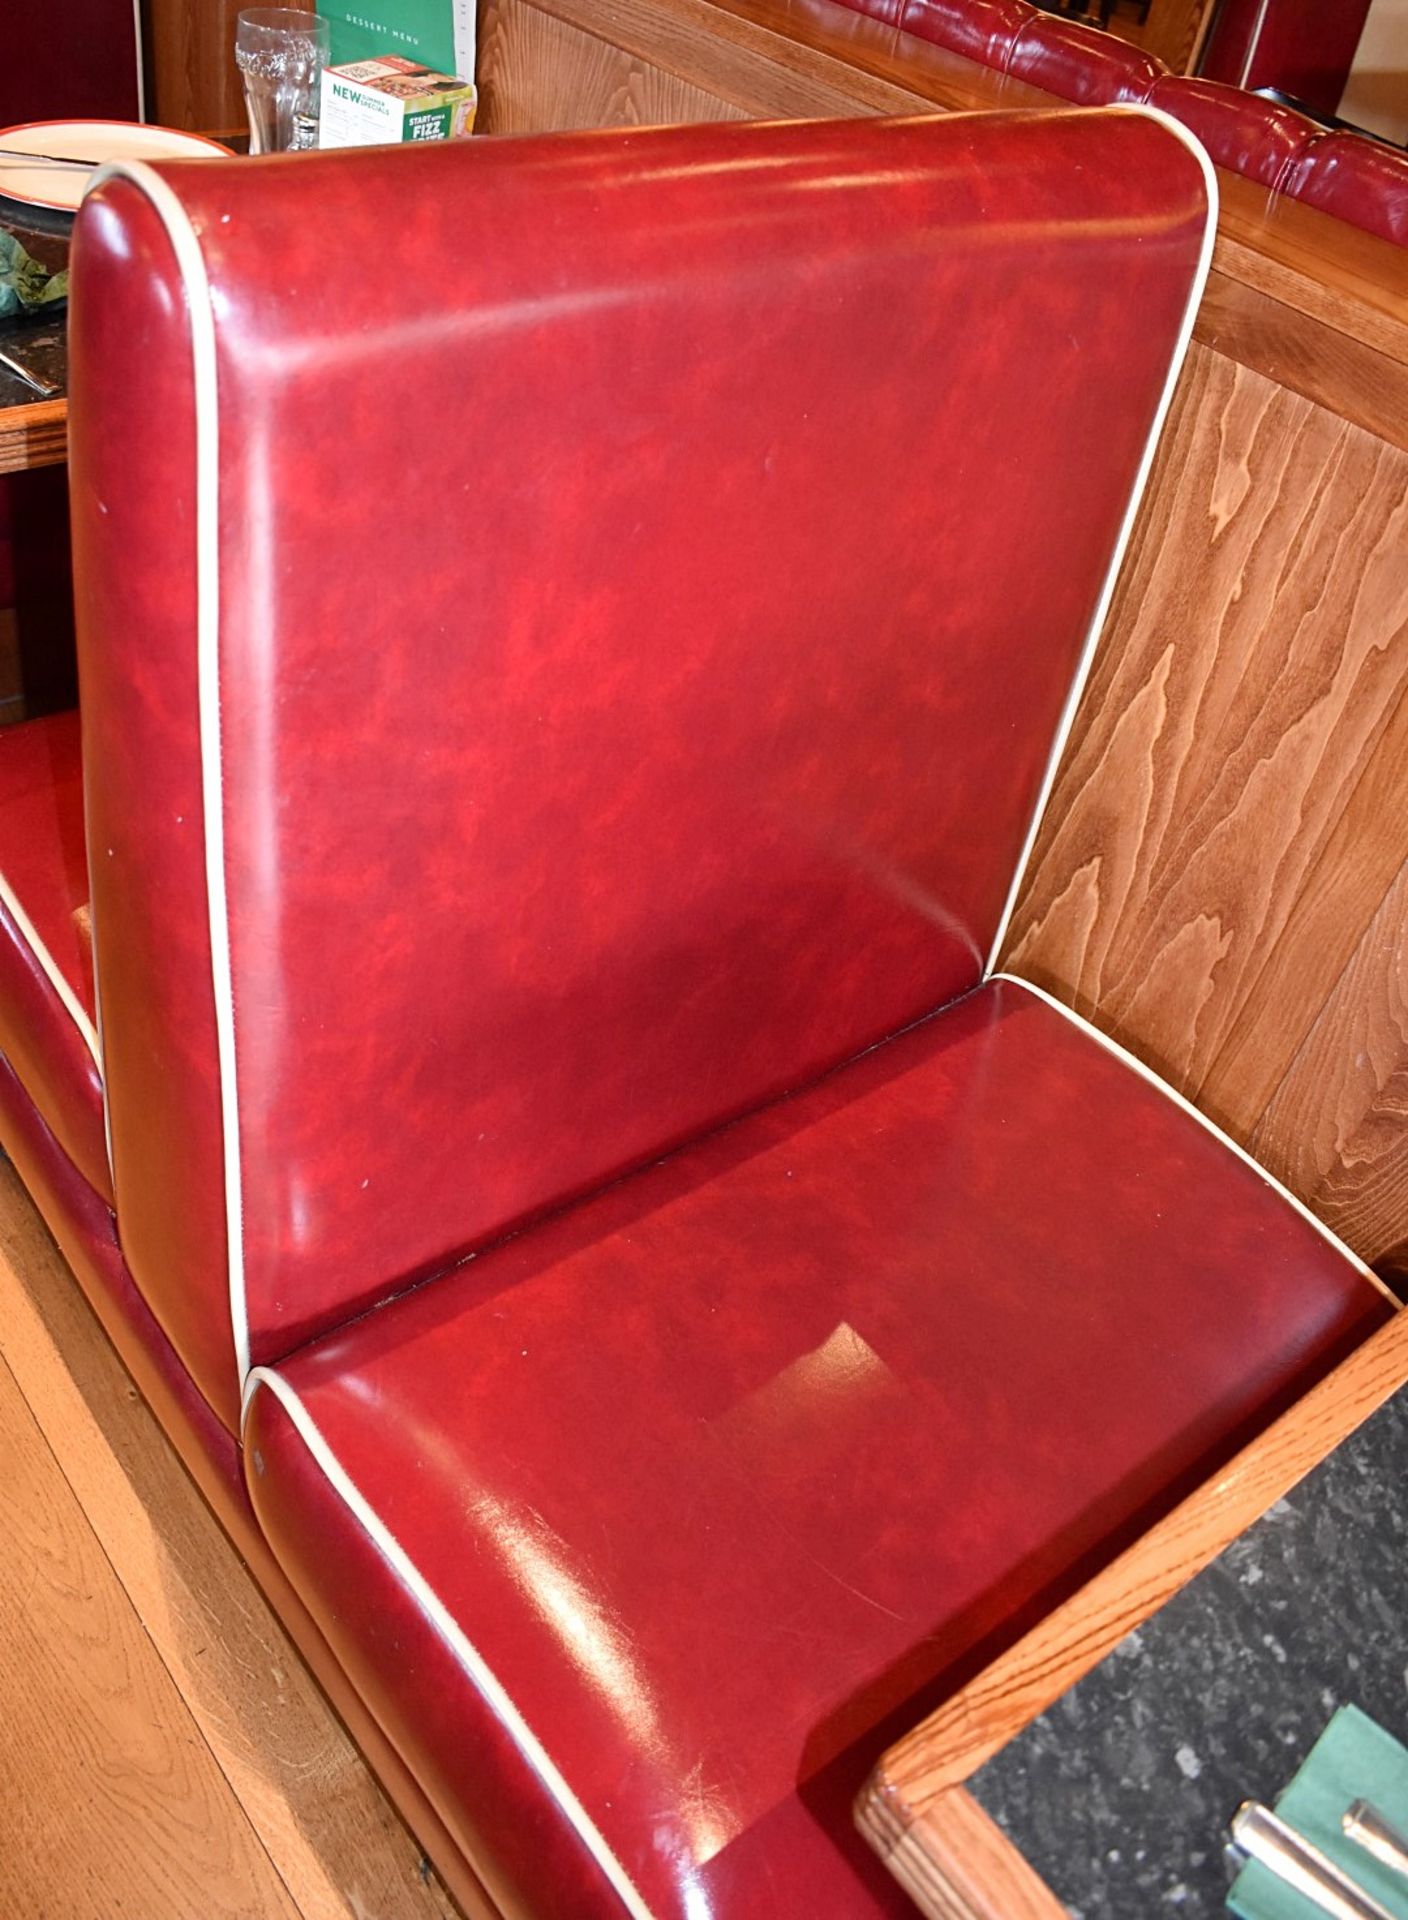 4 x Sections Restaurant Seating - Retro 1950s American Diner Design - Red Faux Leather - Image 5 of 8